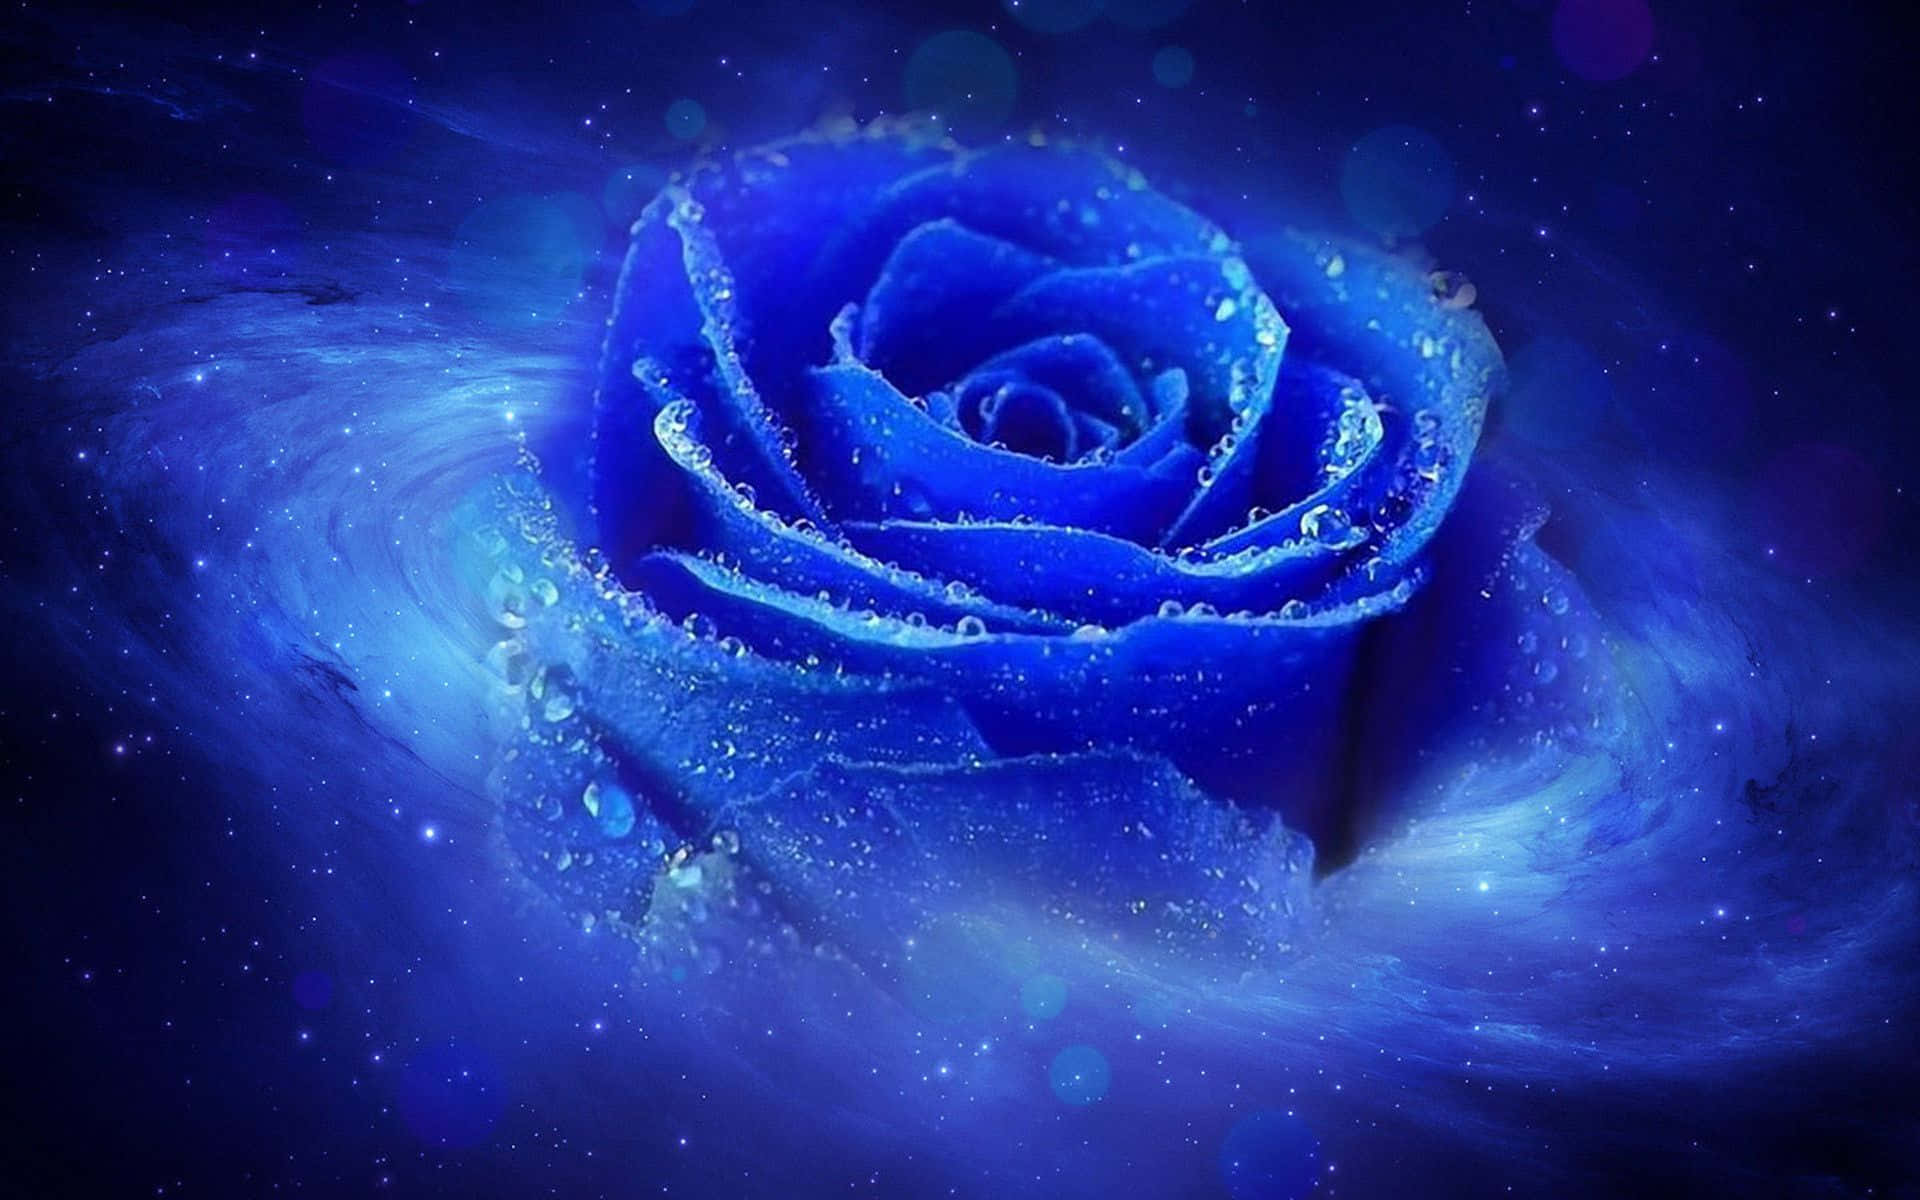 An Ethereal Blue Rose